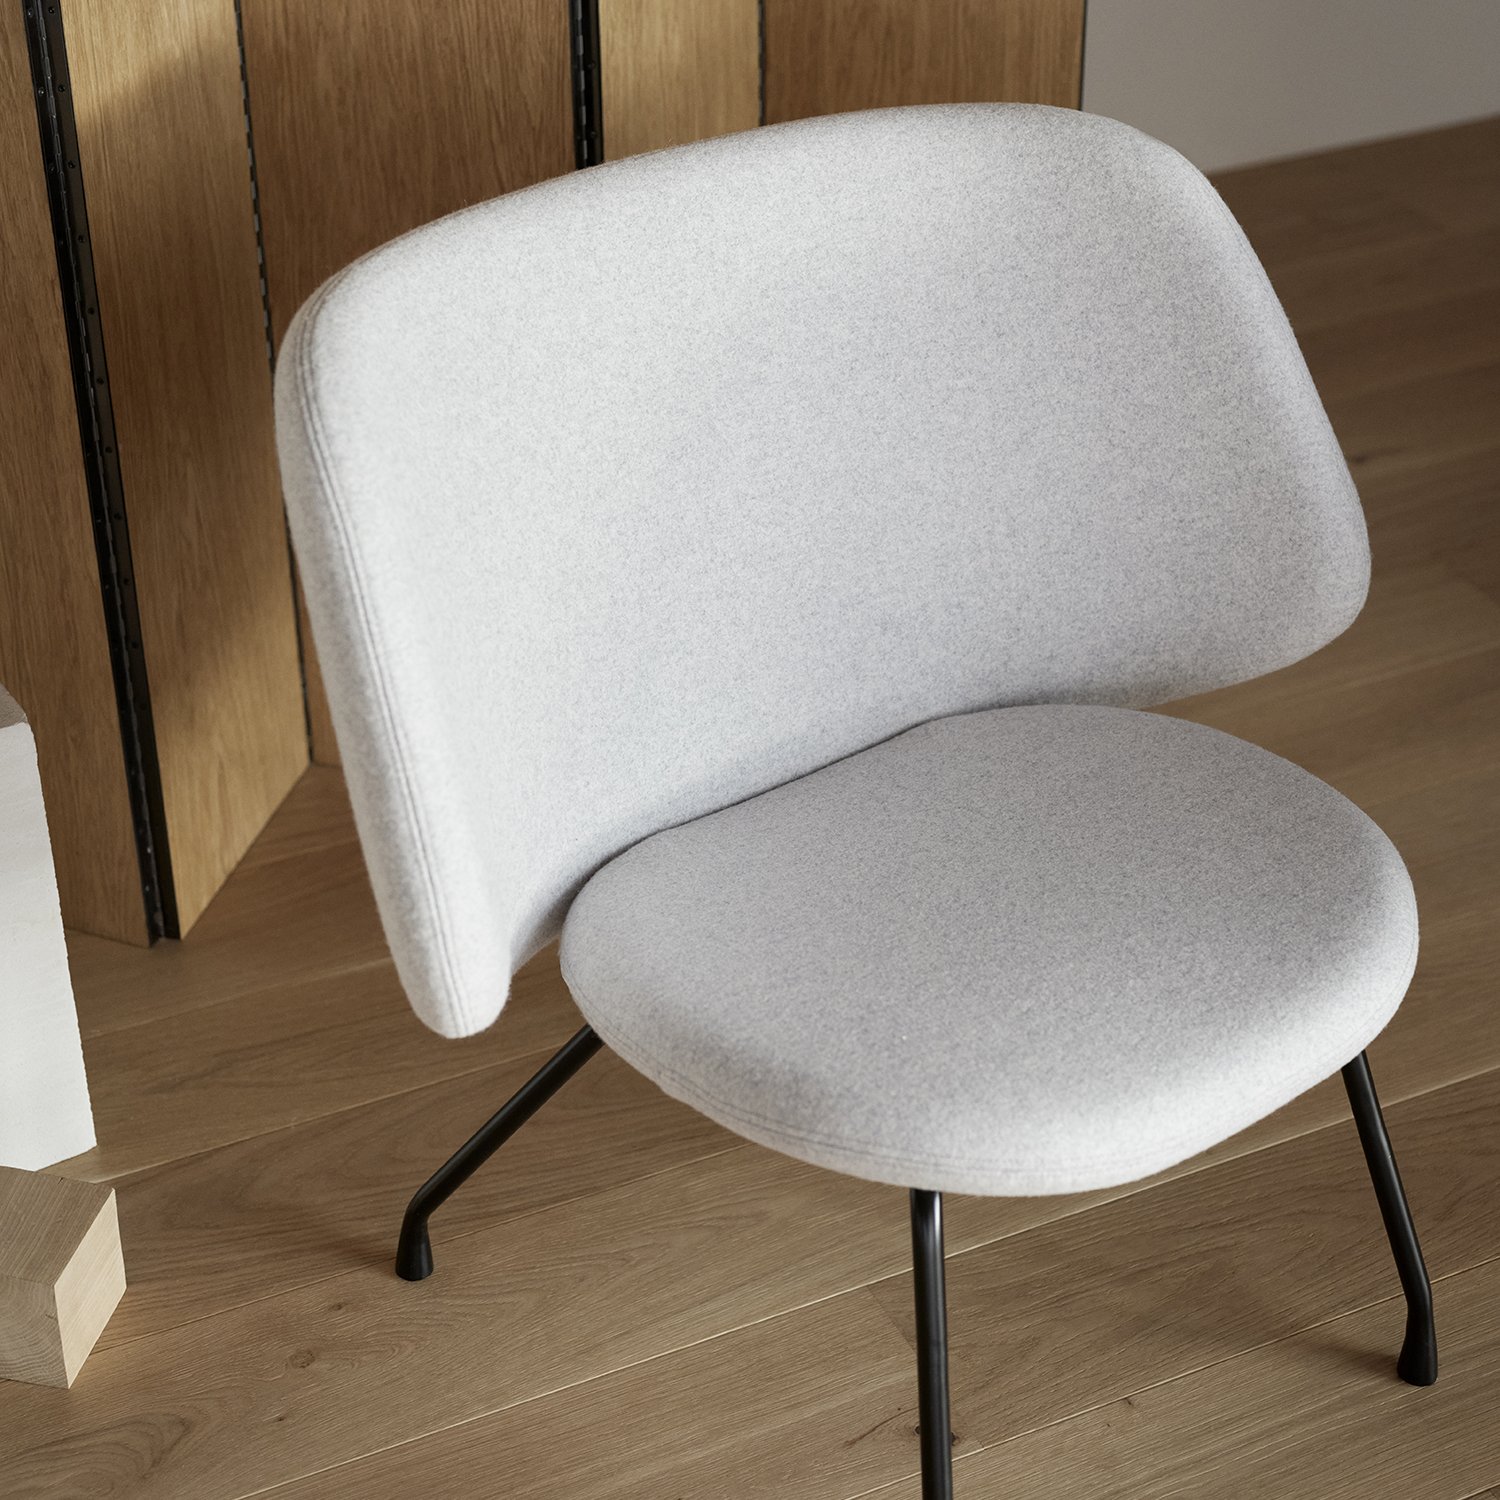 Evy Lounge Chair from Softline, designed by busk+hertzog